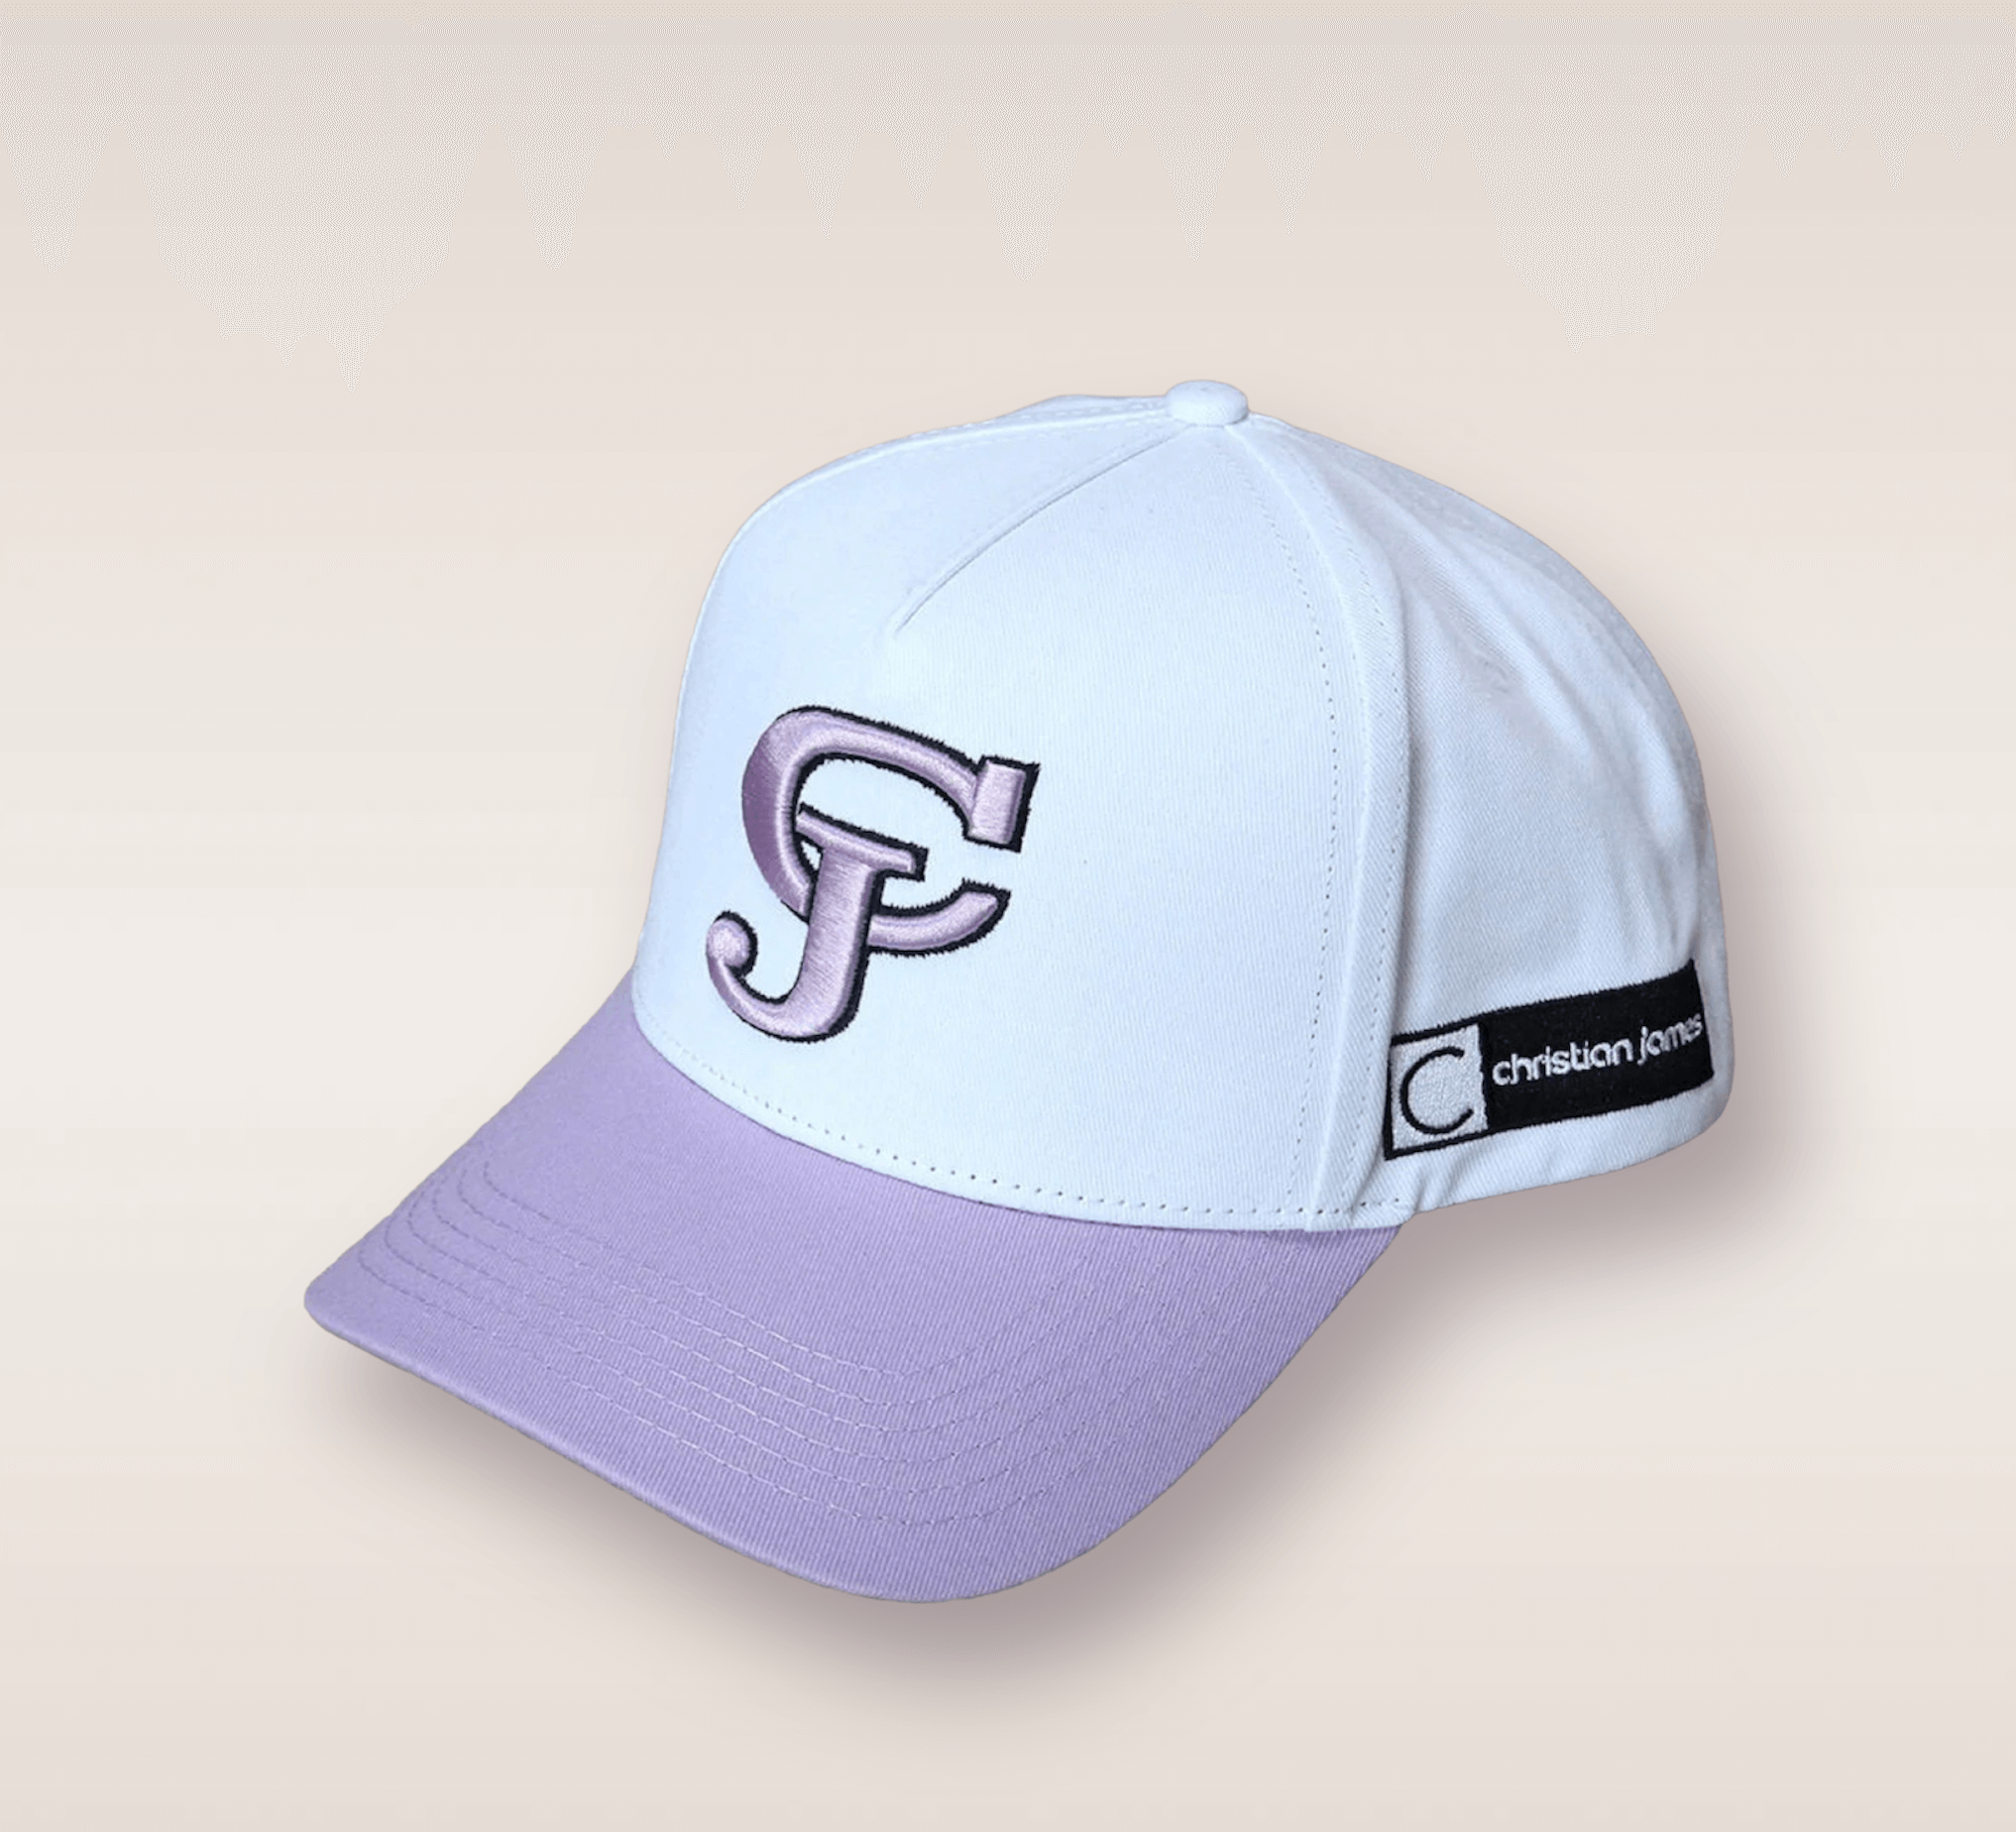 In this up-close shot, we are introduced to the Lavender Brim CJ Snapback. The hat features a white cap and a lavender brim. Embroidered in lavender lettering is the brand’s acronym 